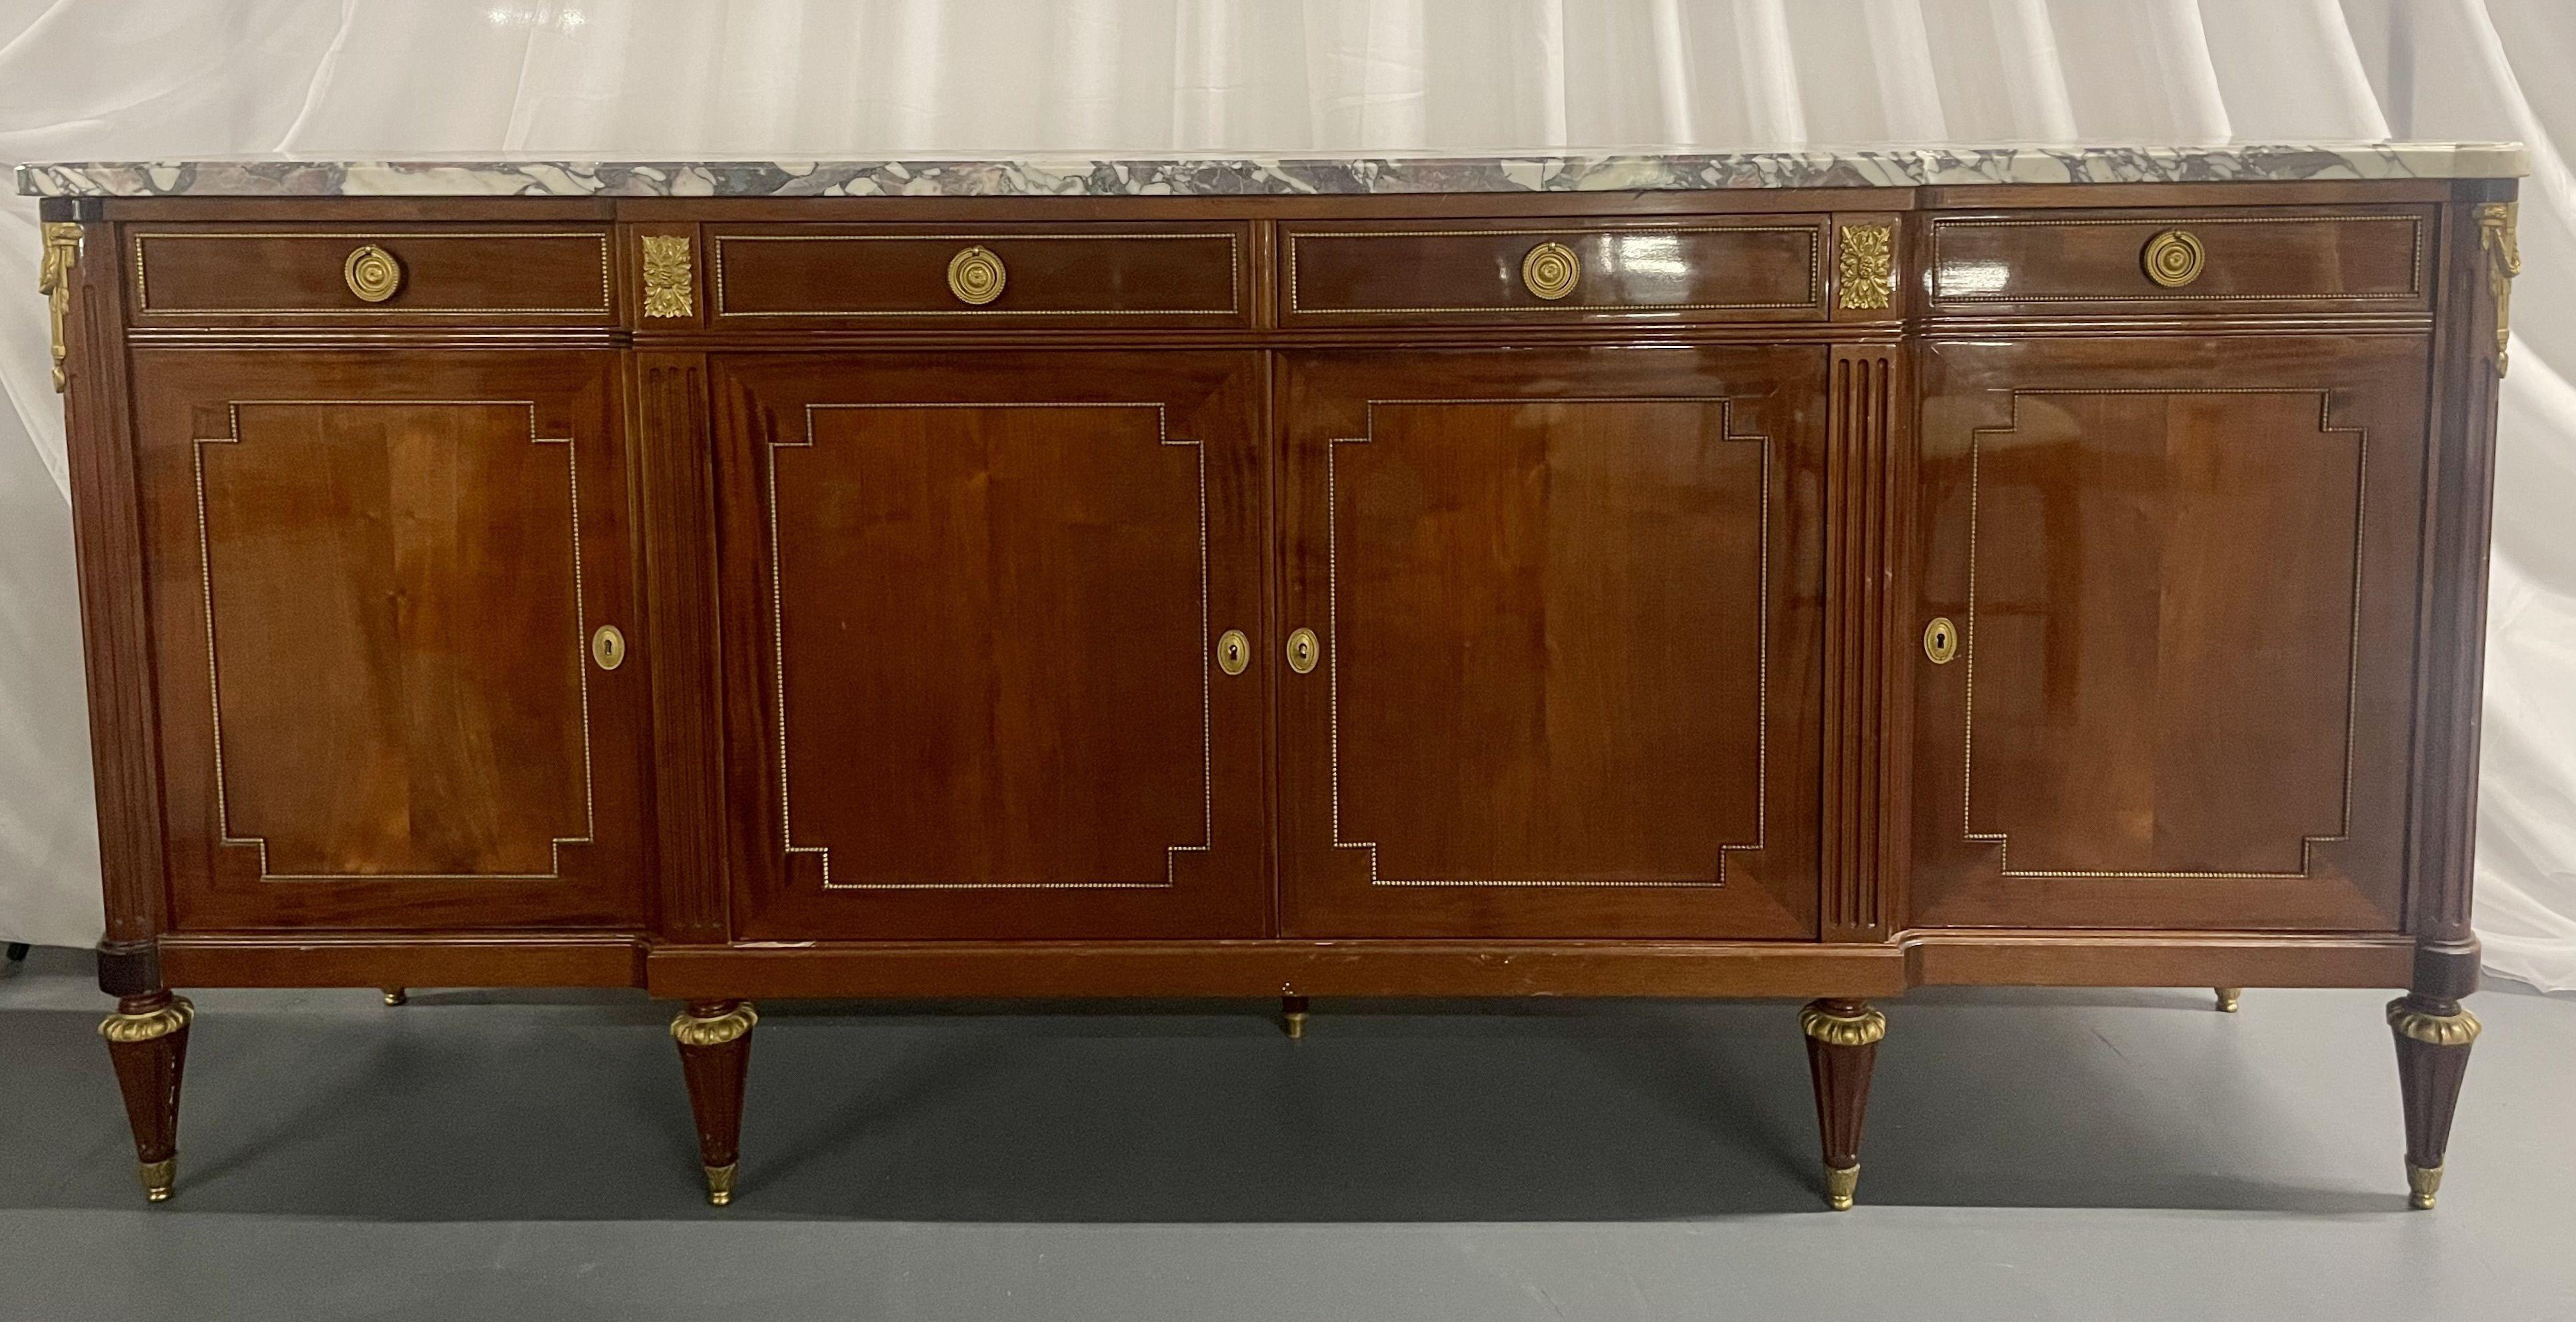 A French Louis XVI Style Sideboard in Maison Jansen Fashion. This stunning bronze mounted credenza, sideboard sports a fine Breche marble top and bronze trim throughout. The case having bronze mounted legs supporting four doors leading to fitted